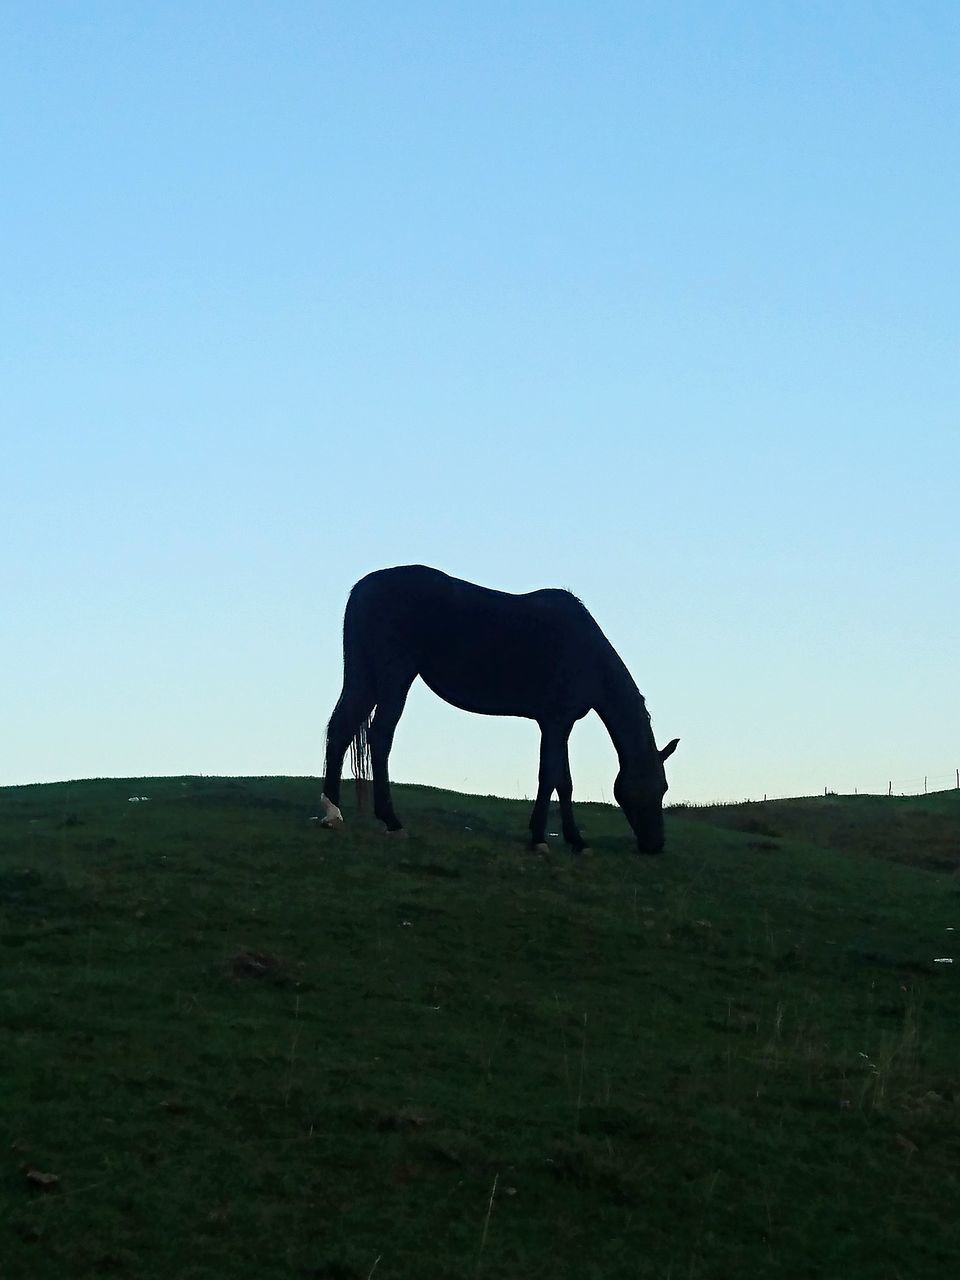 SIDE VIEW OF HORSE ON FIELD